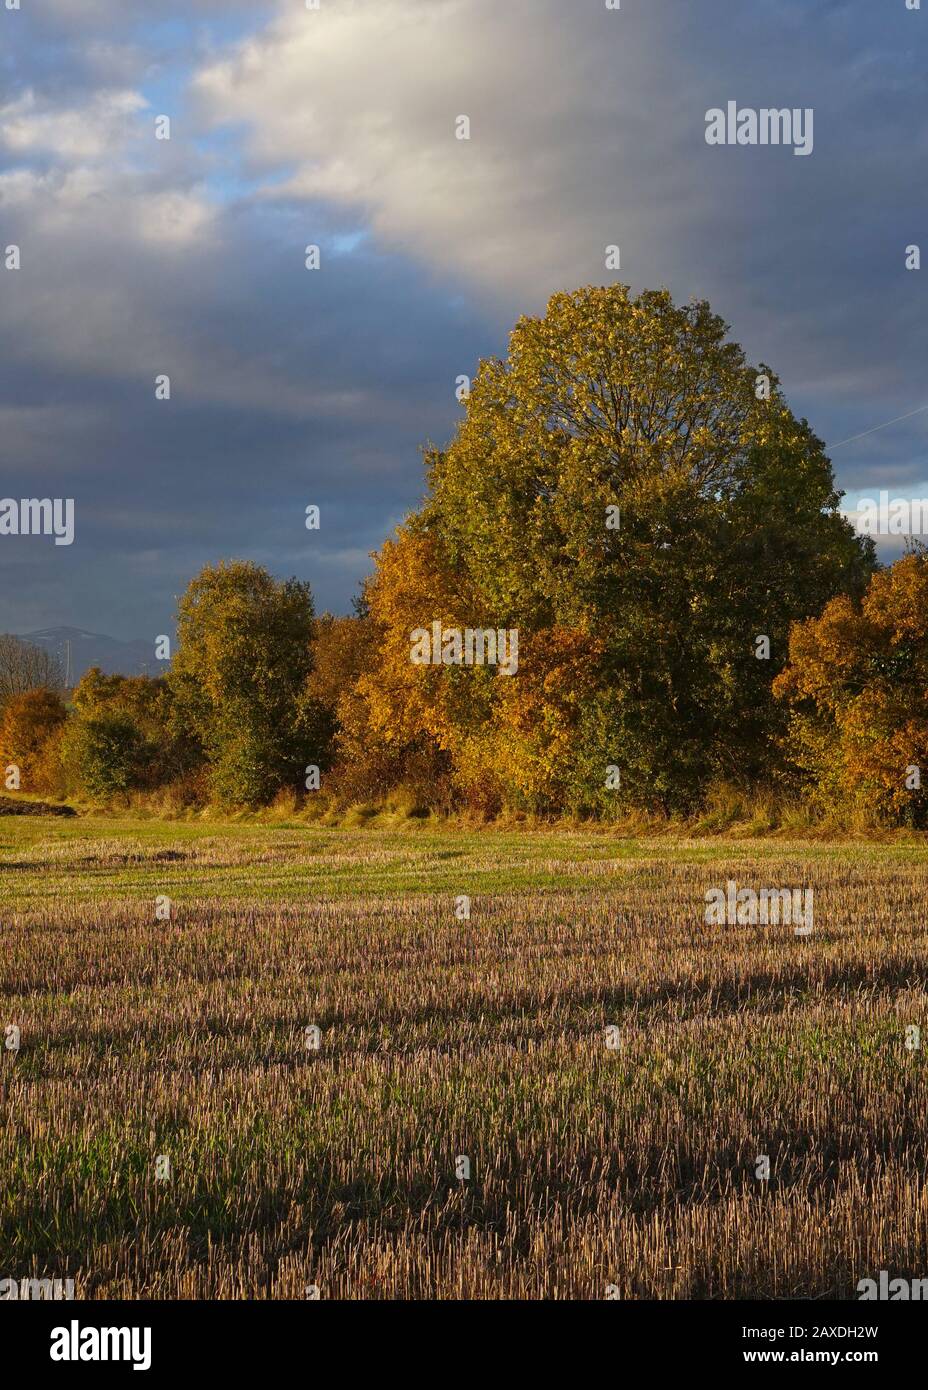 Autumnal row of trees at the edge of a freshly cut field bathed in sunlight Stock Photo